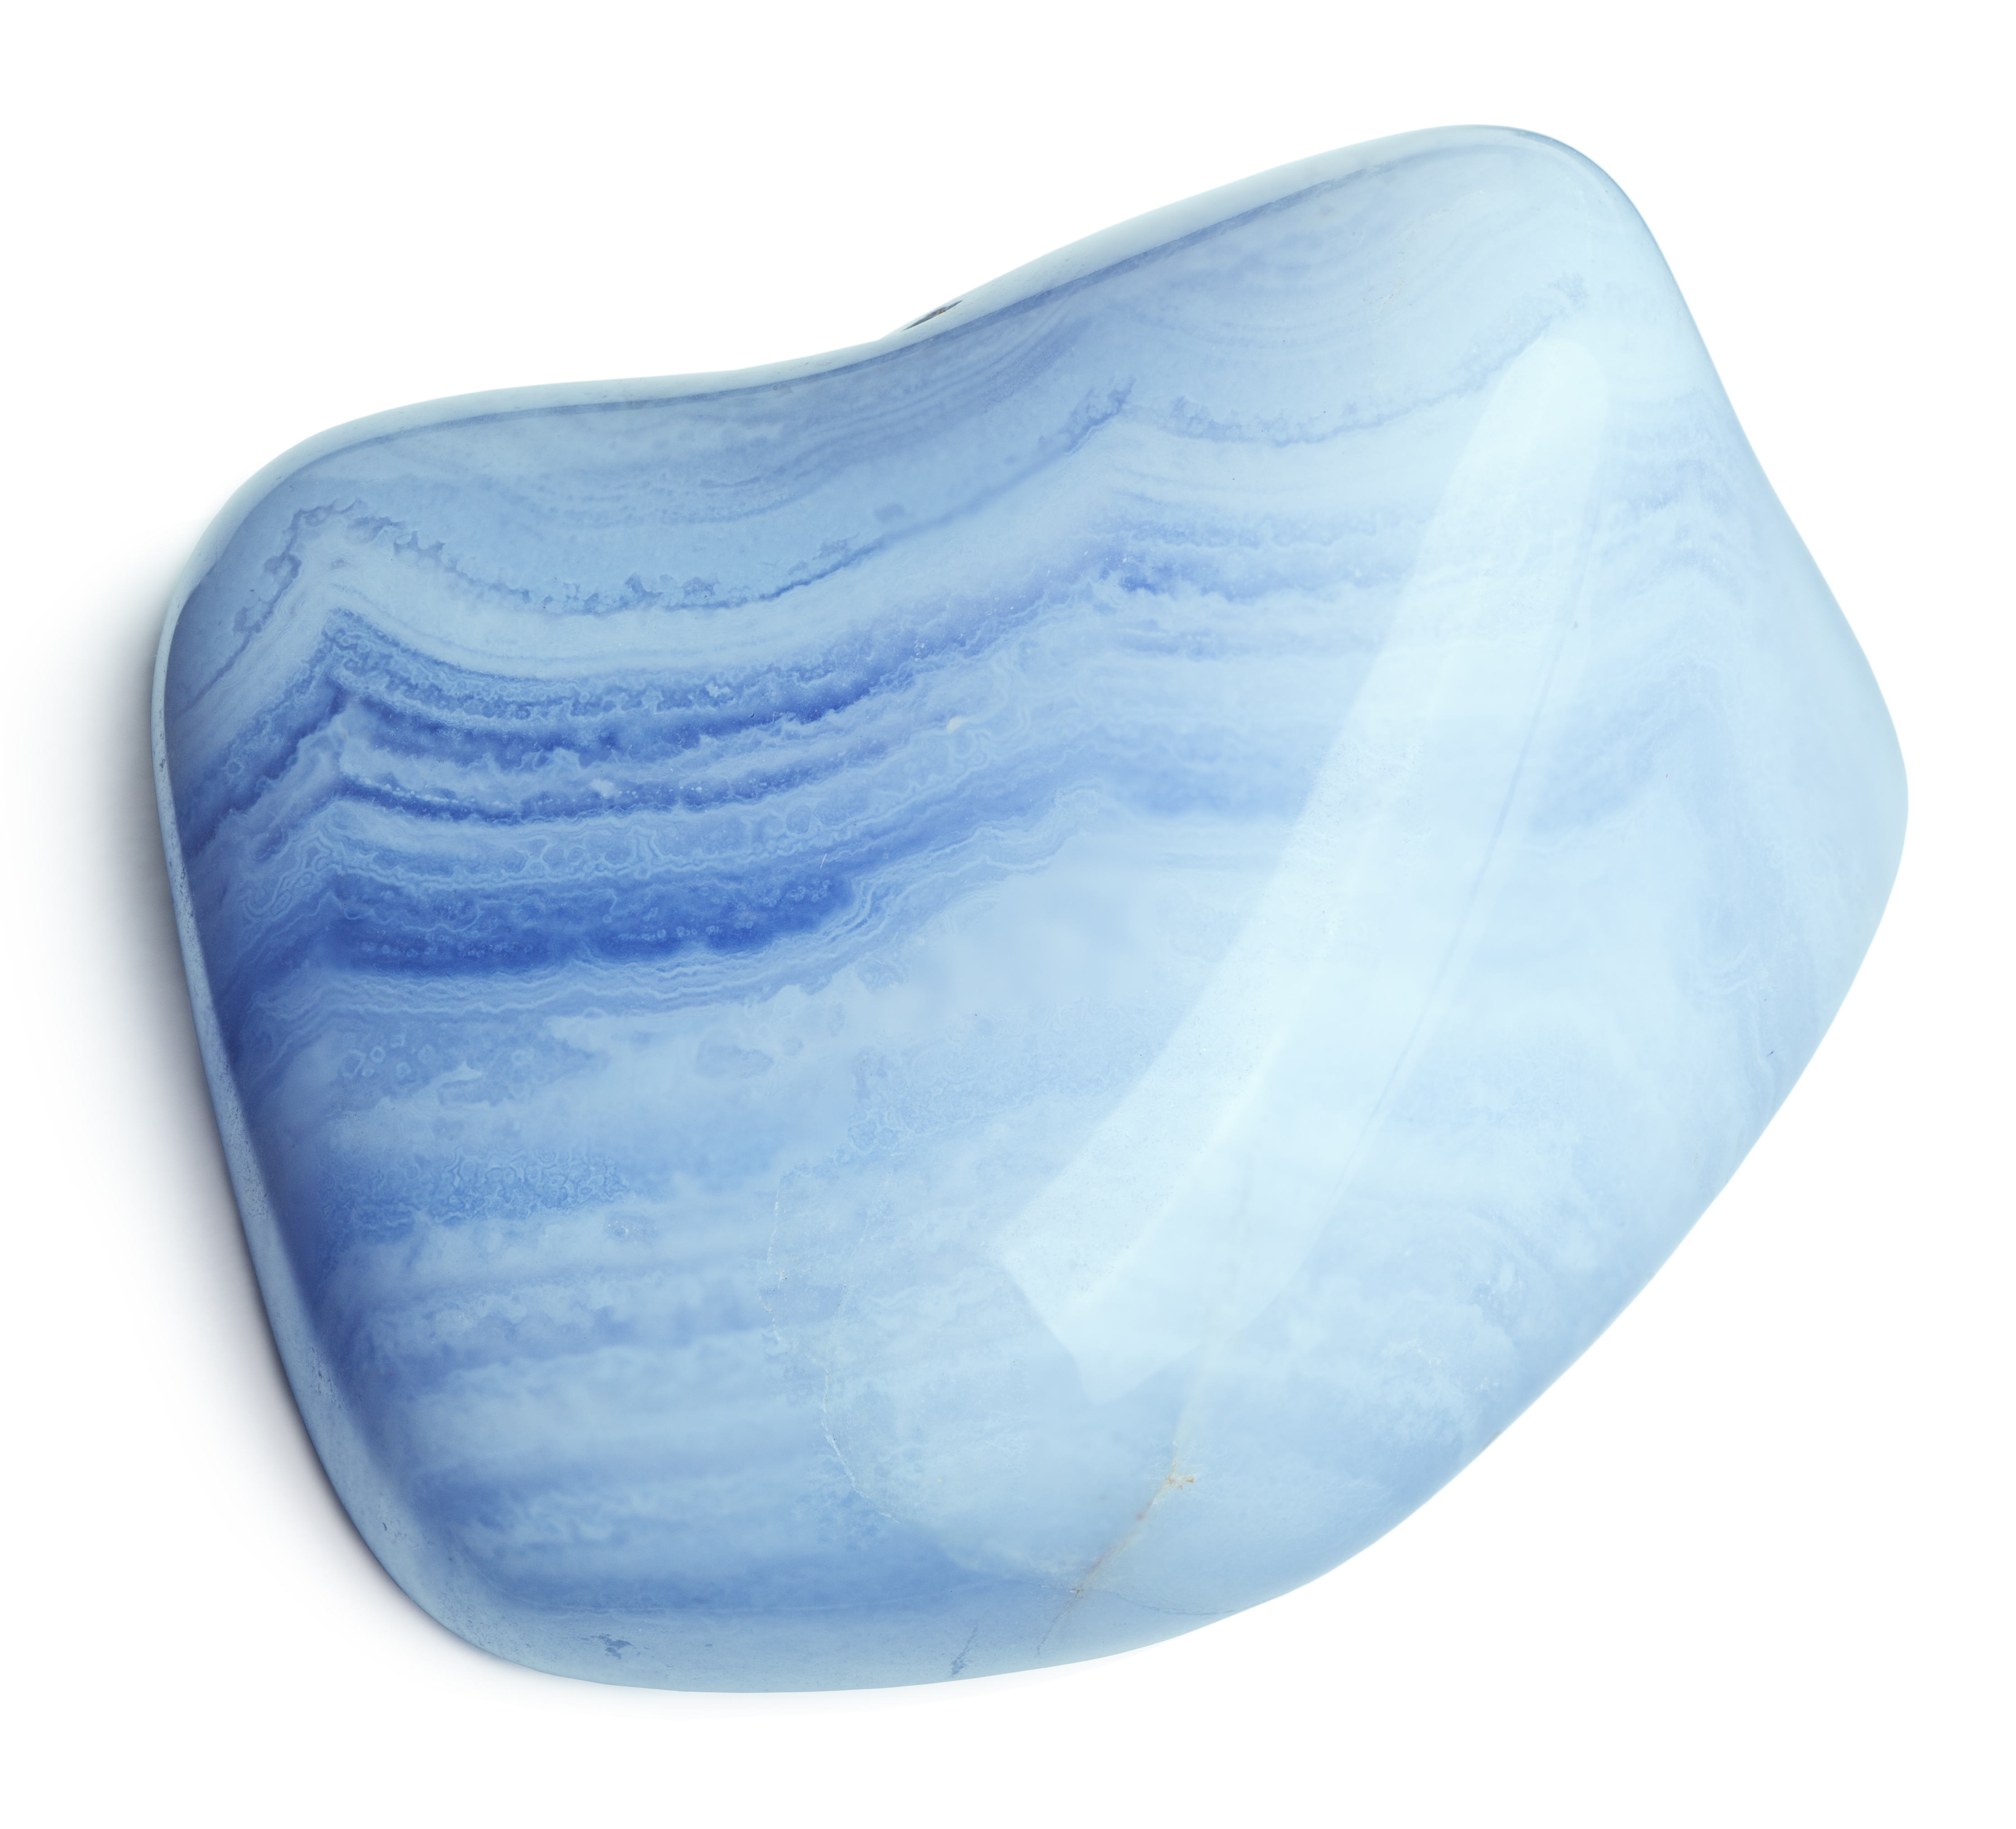 An image of blue chalcedony